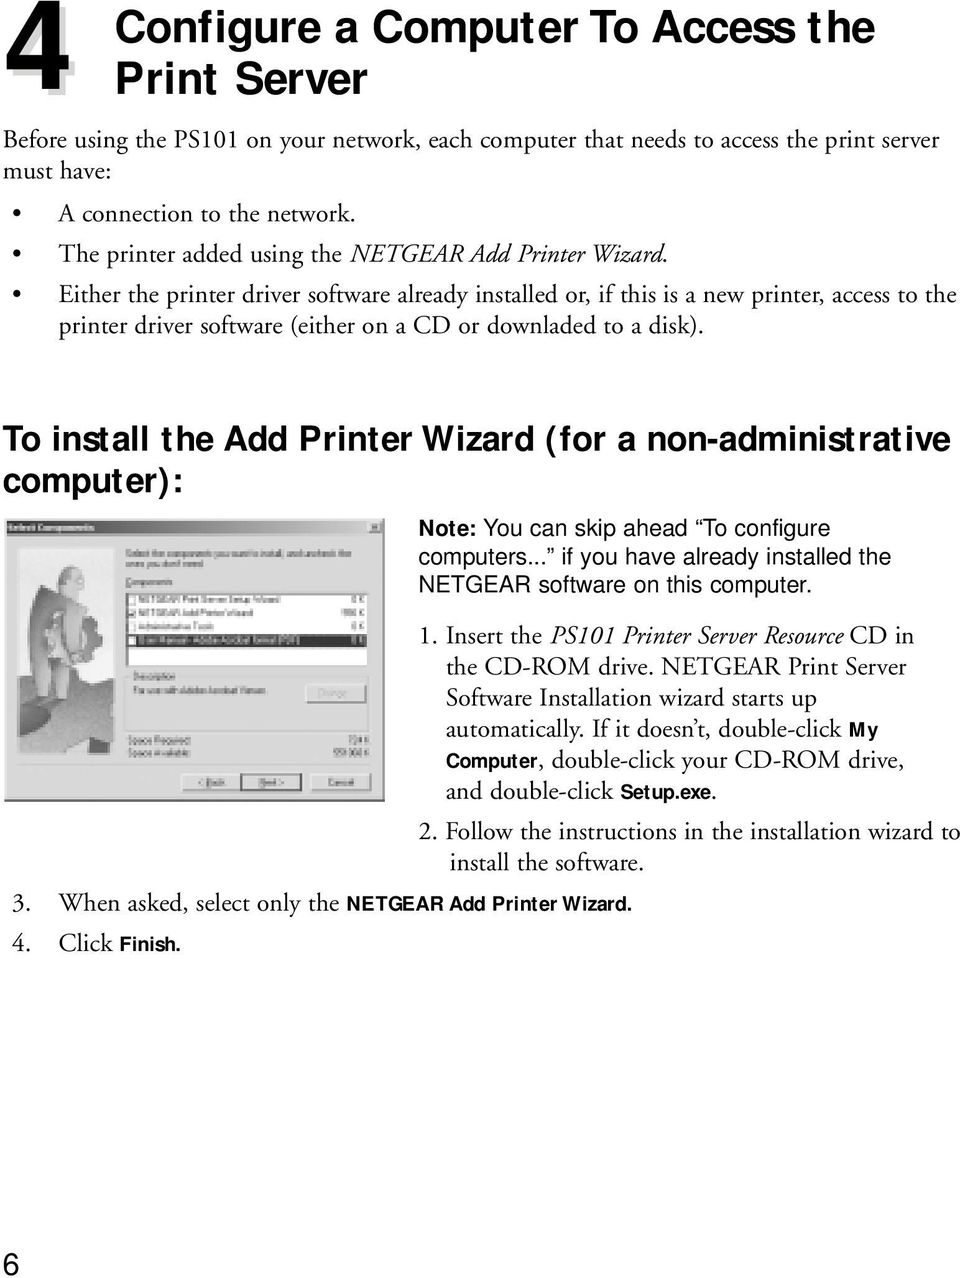 Either the printer driver software already installed or, if this is a new printer, access to the printer driver software (either on a CD or downladed to a disk).